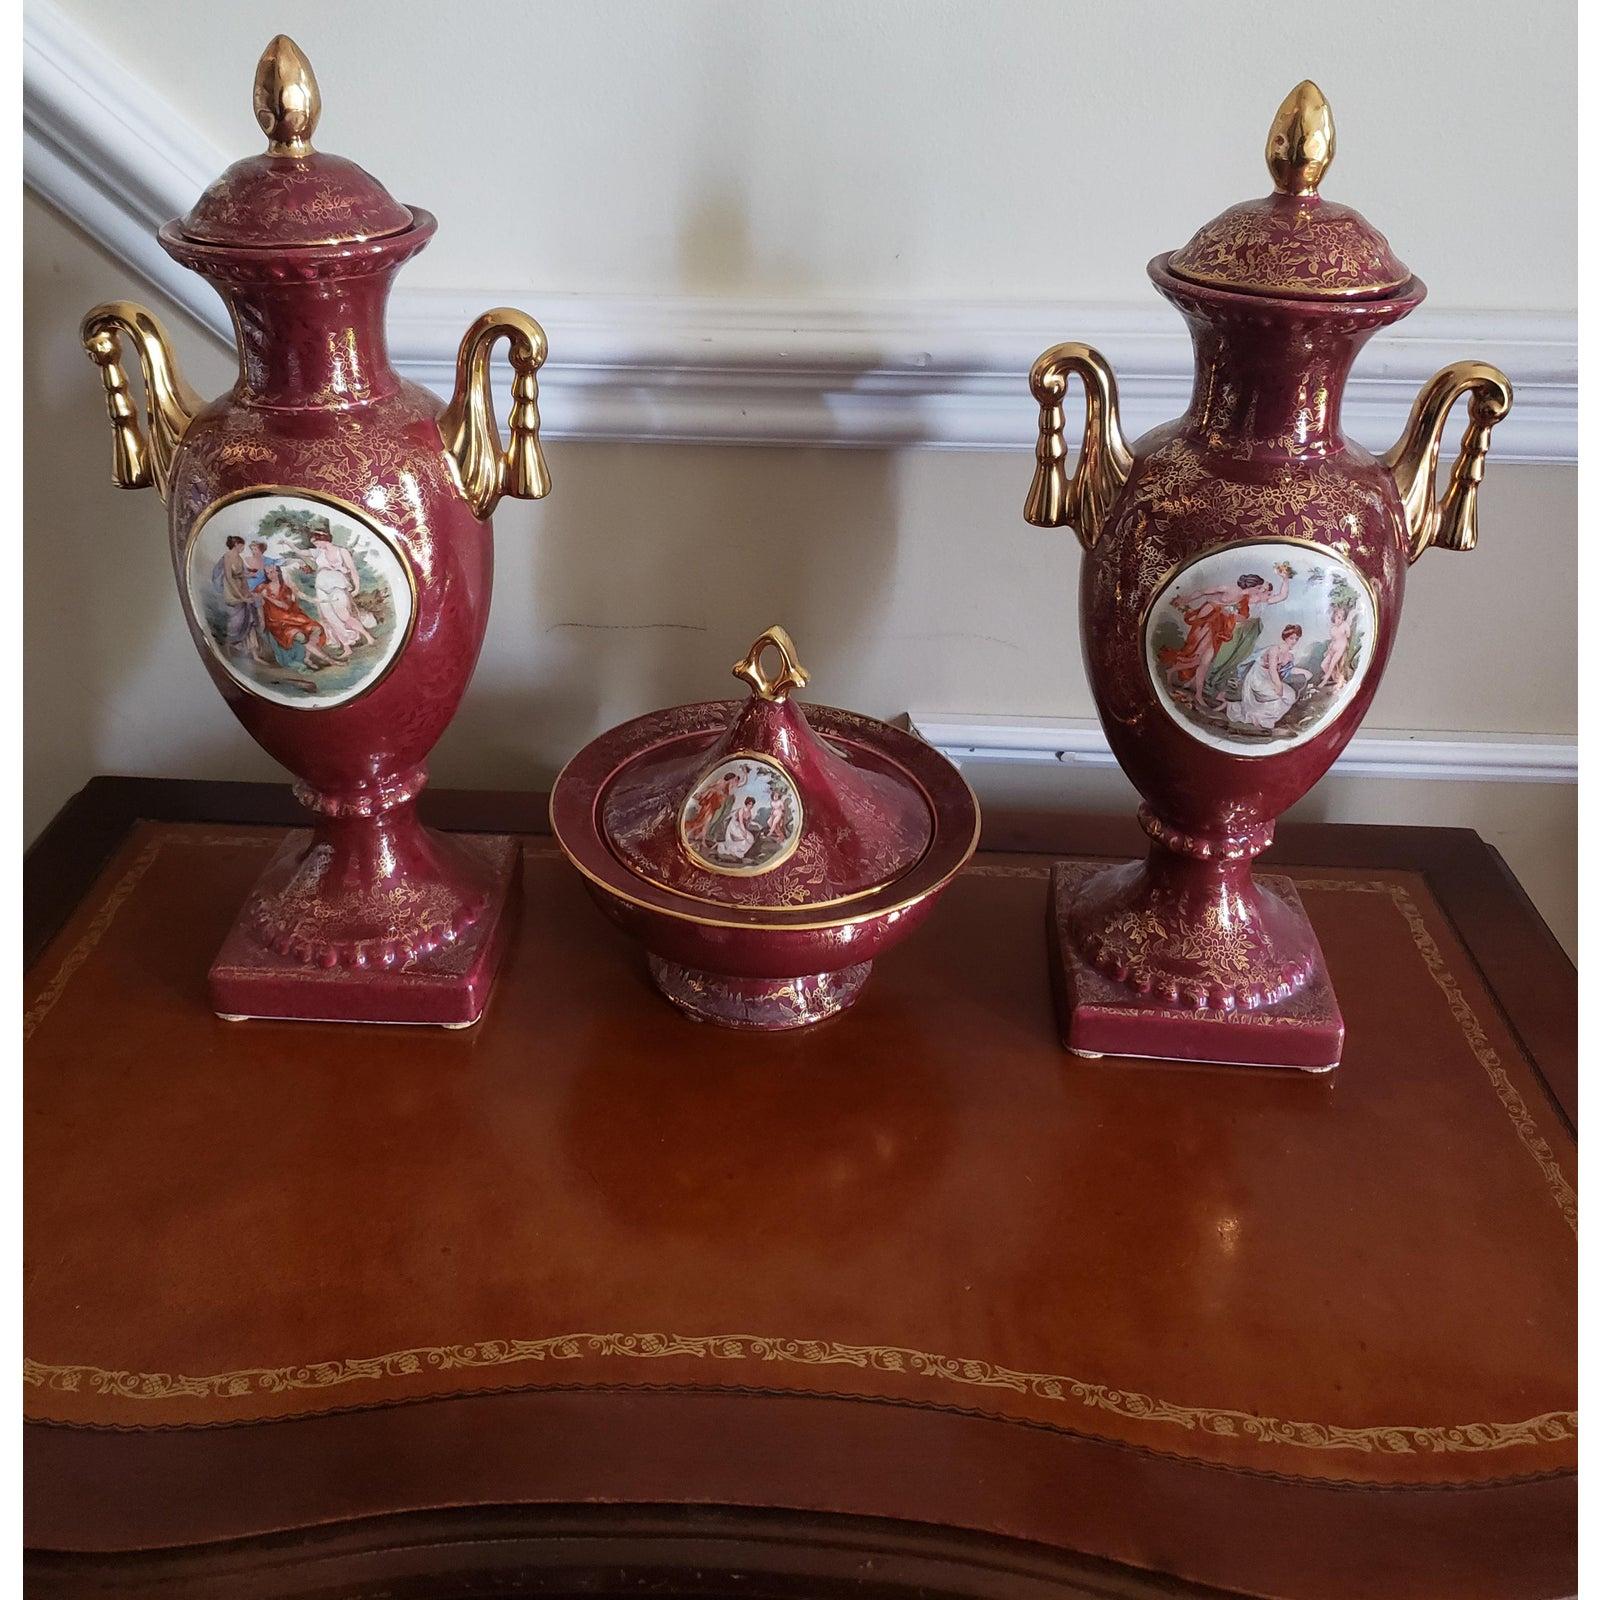 Early Victorian Antique 1930s English Empire Ware Urns Set, 5 Piece Set For Sale